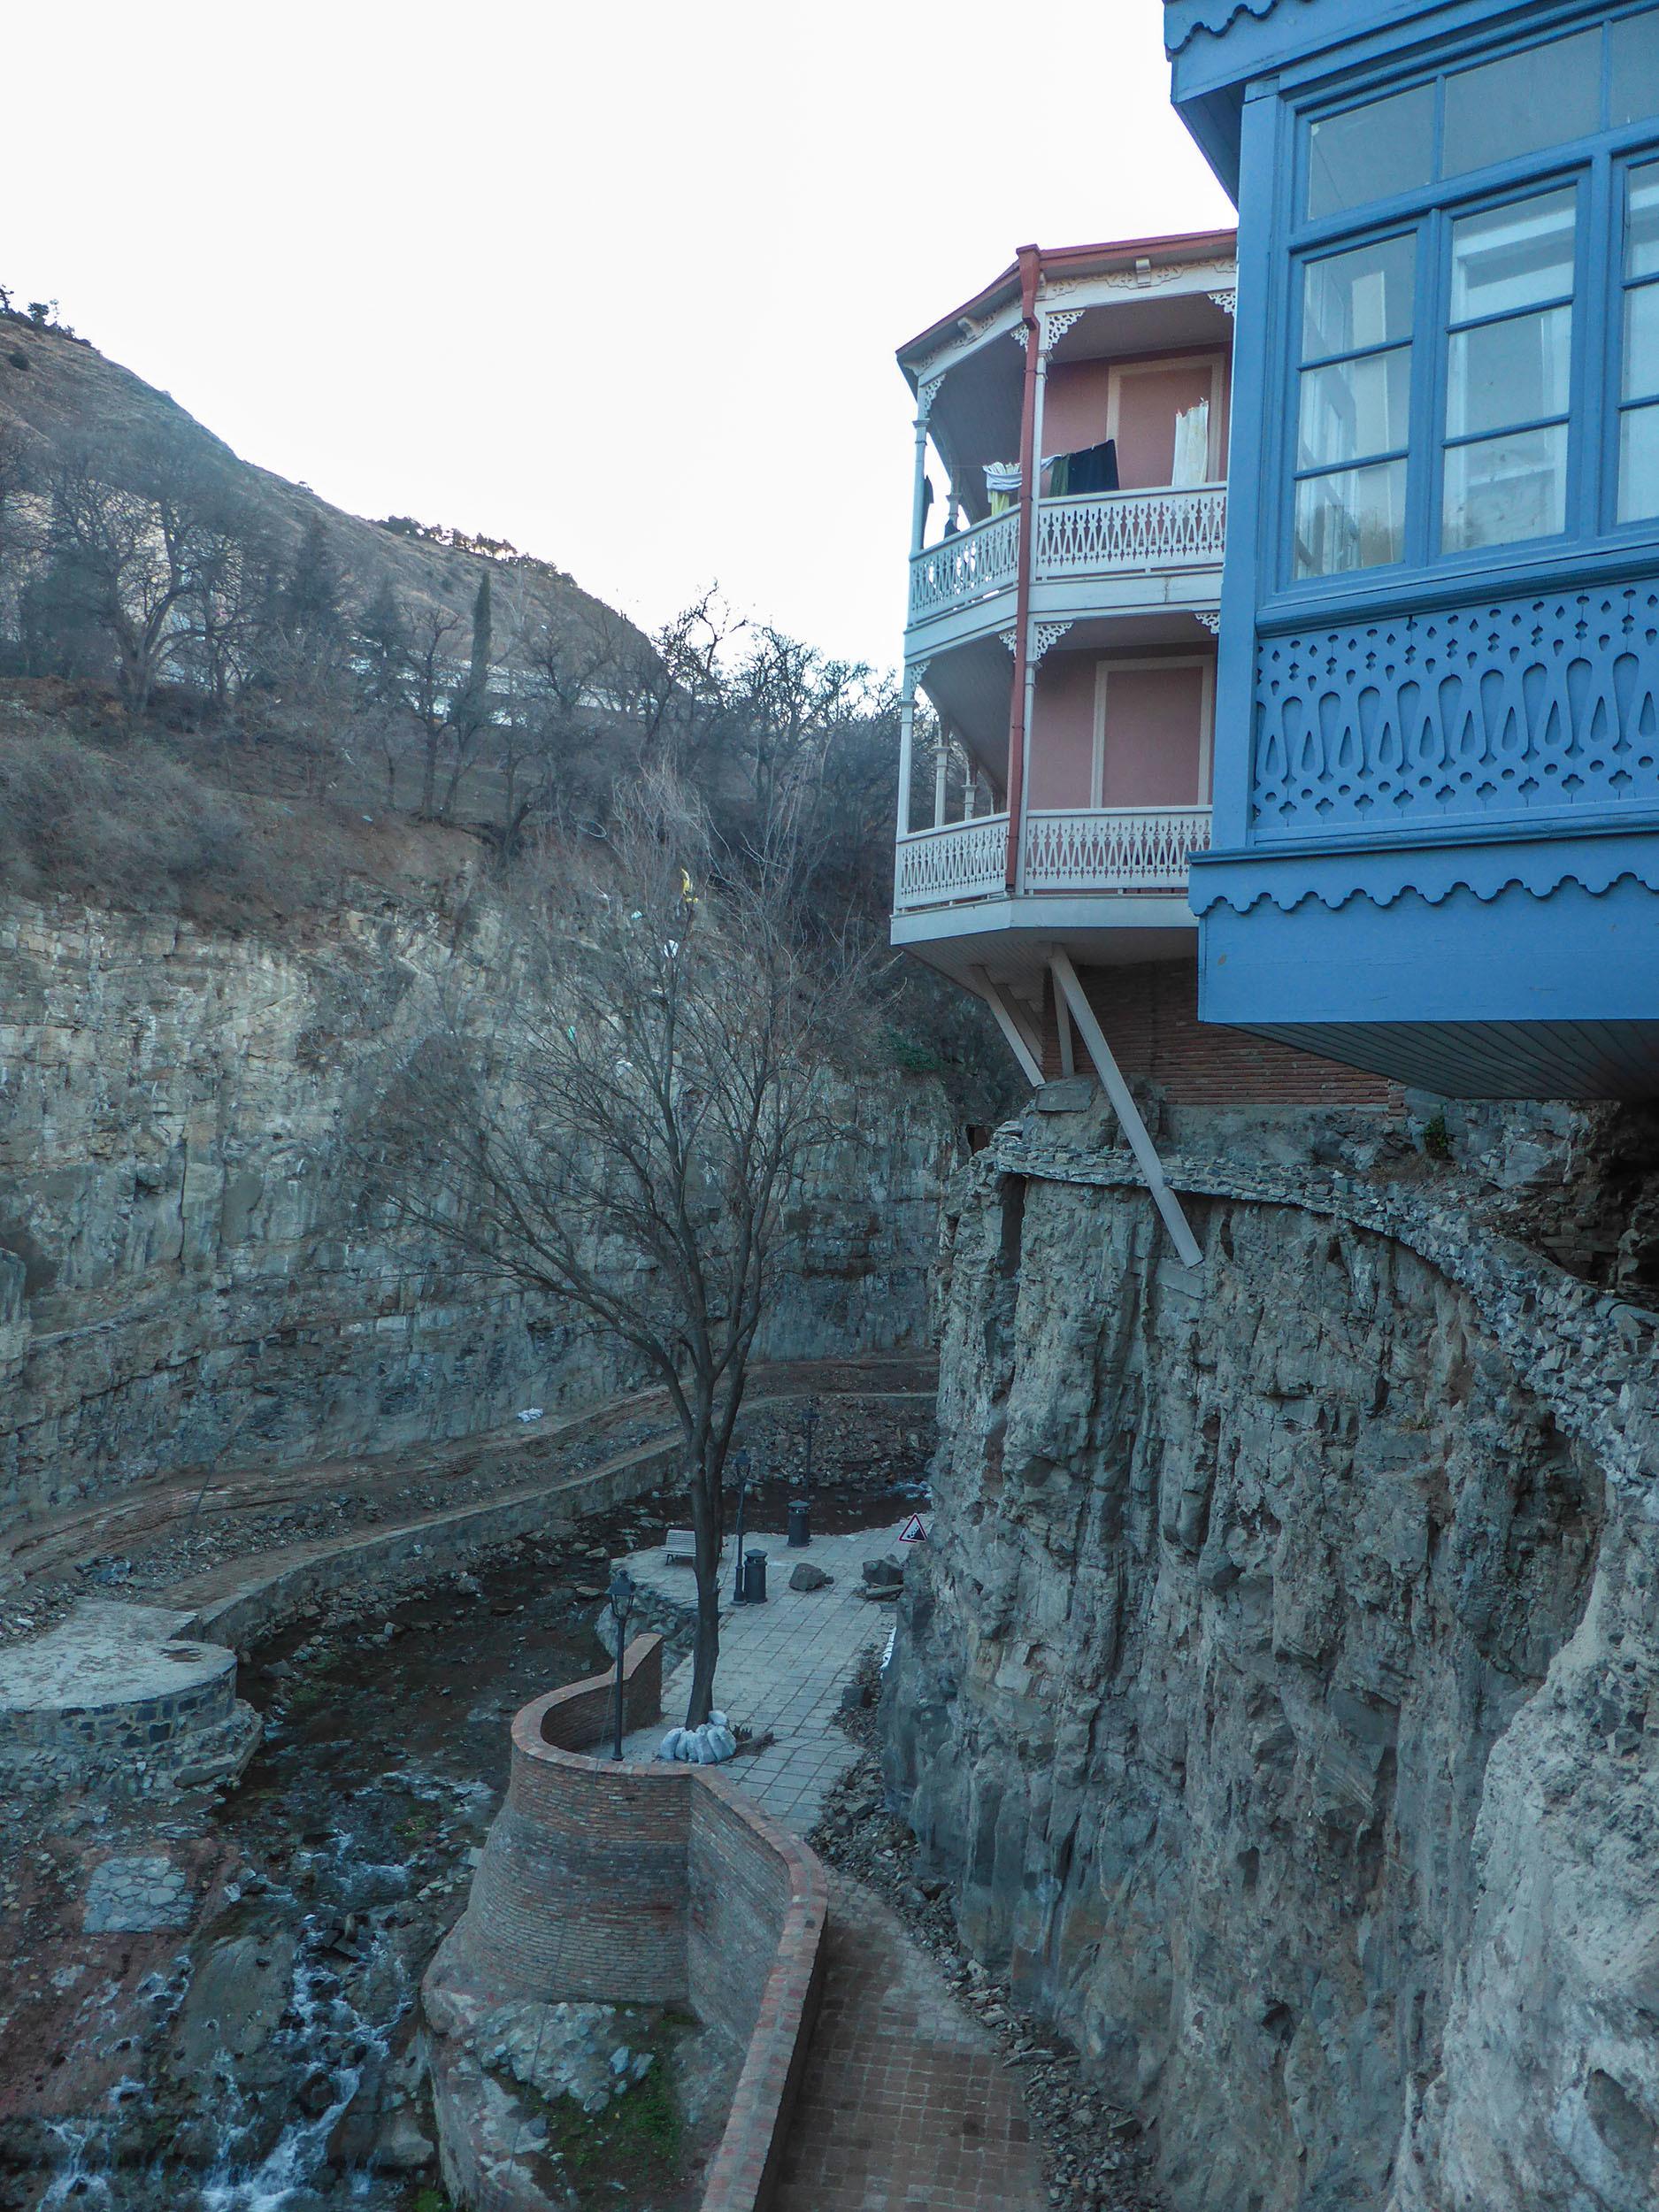 Cliff-edge homes in Old Town Tbilisi Georgia